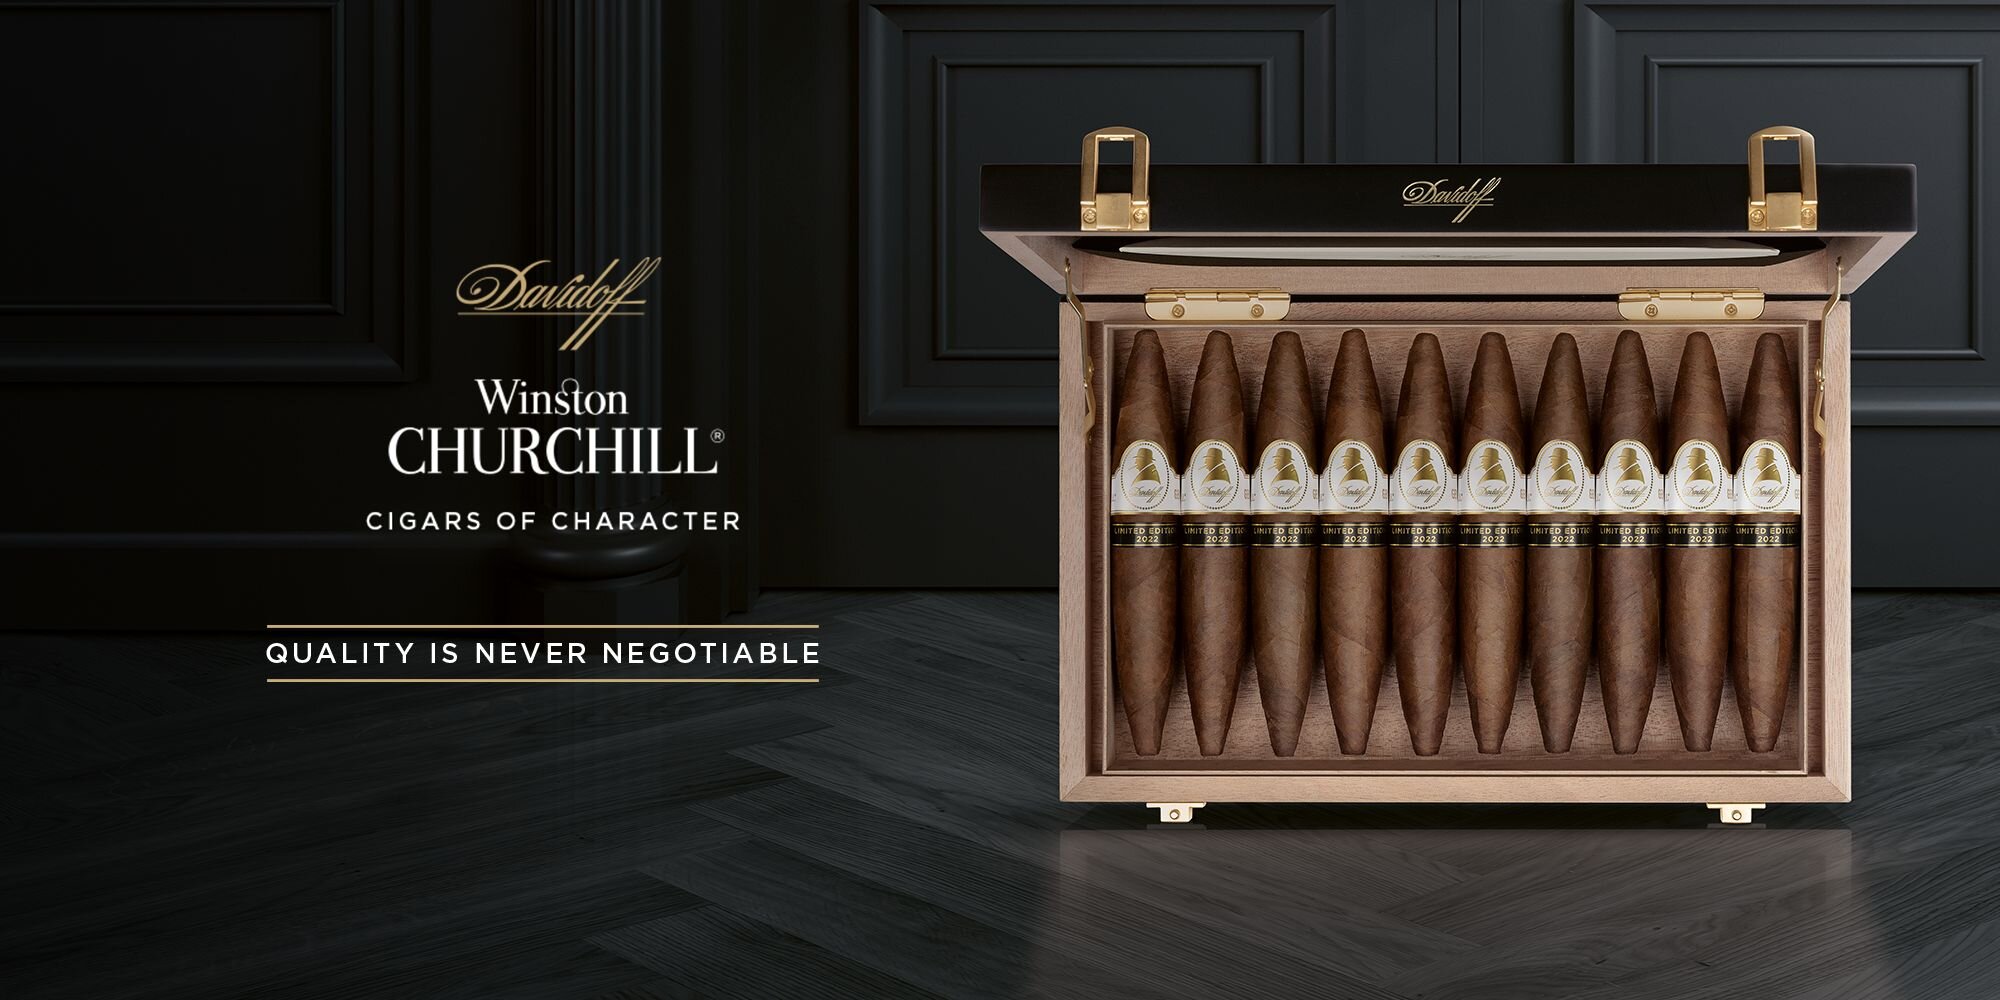 Davidoff Winston Churchill Limited Edition 2022 banner with ten perfecto cigars in their opened box.